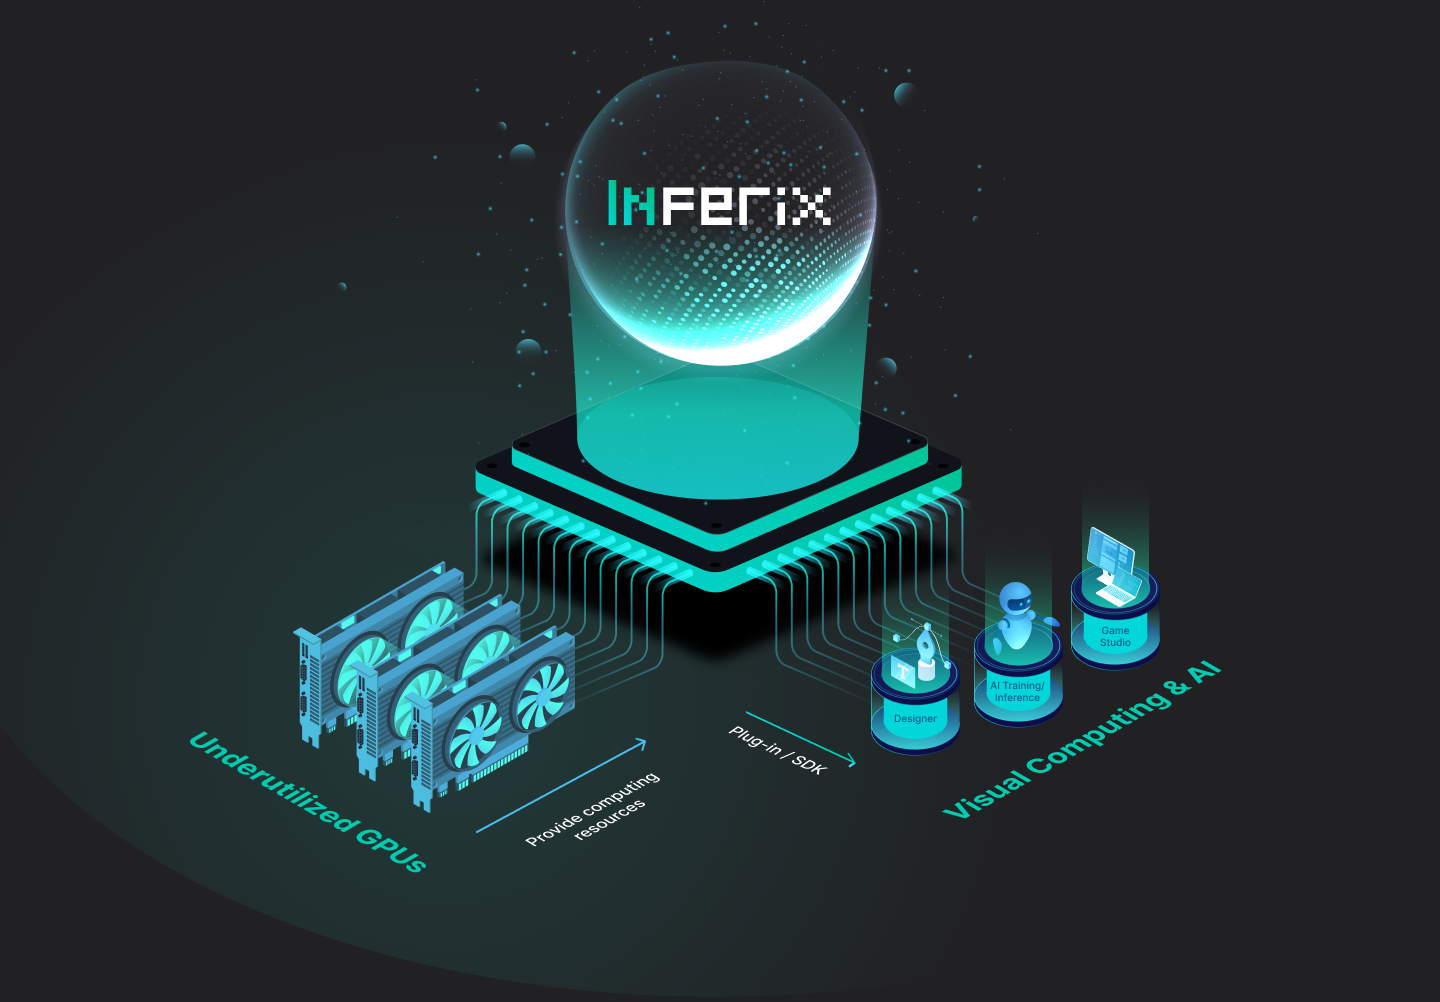 Inferix – the first AI-DePIN to deploy natively on IoTeX